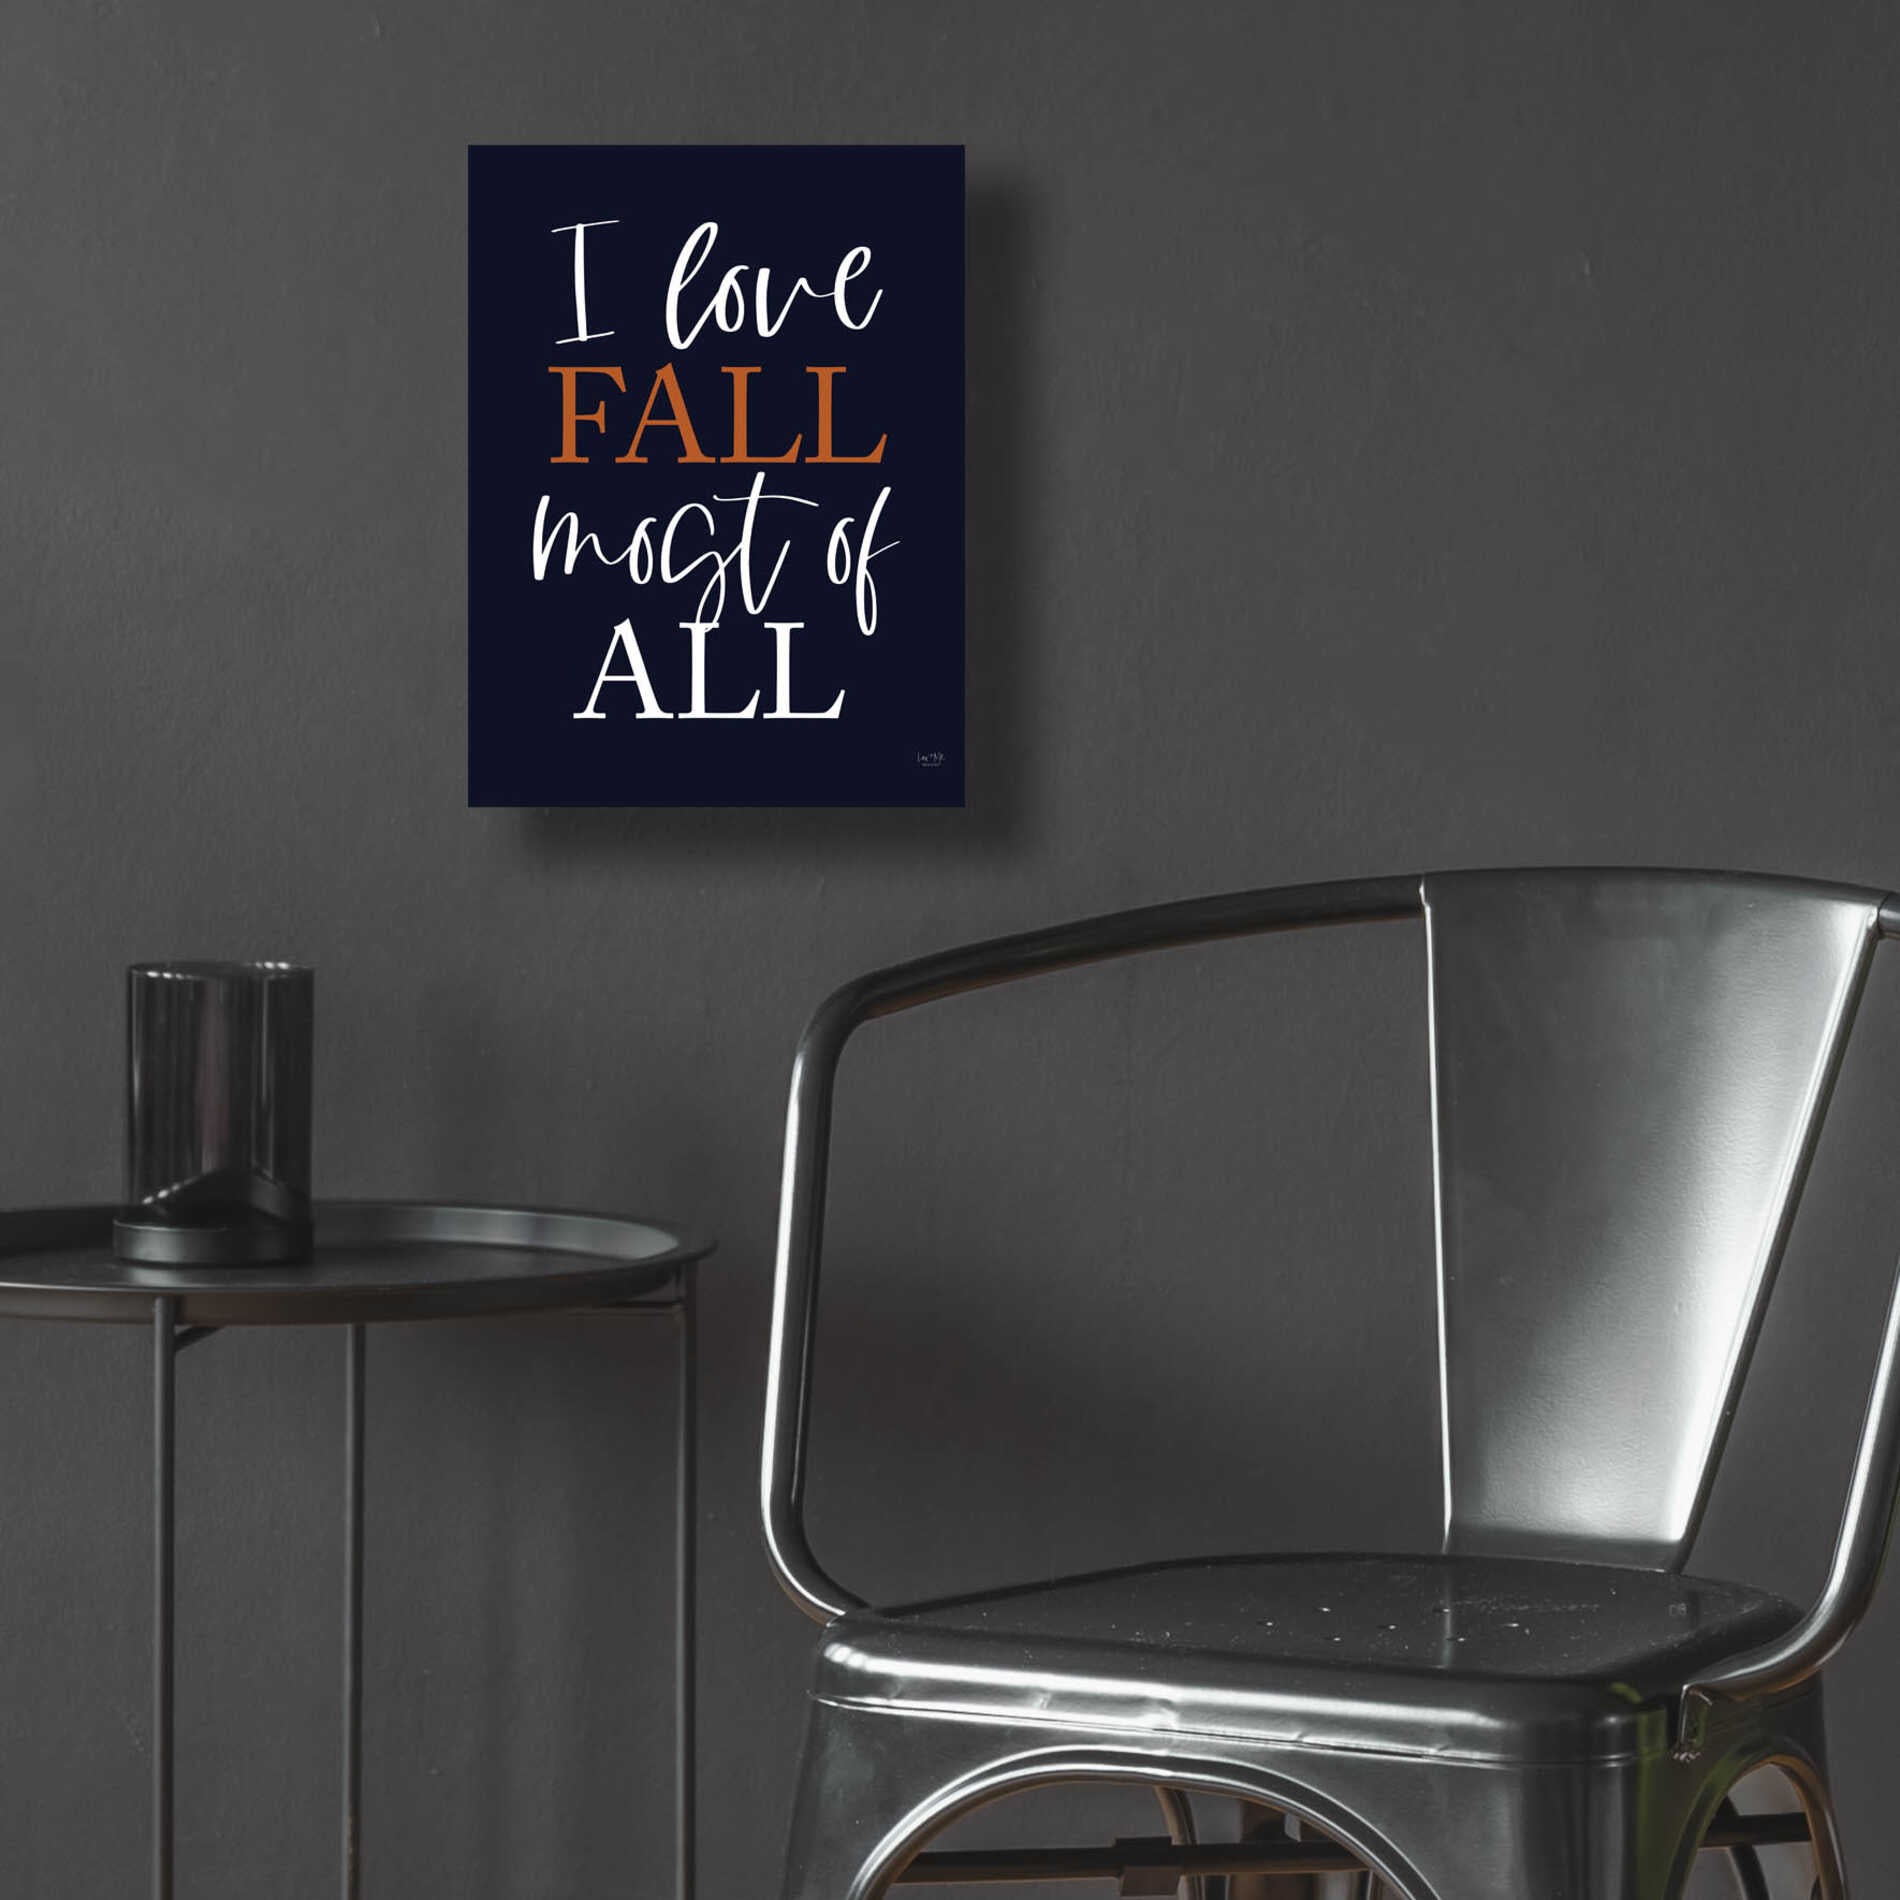 Epic Art 'I Love Fall' by Lux + Me Designs, Acrylic Glass Wall Art,12x16